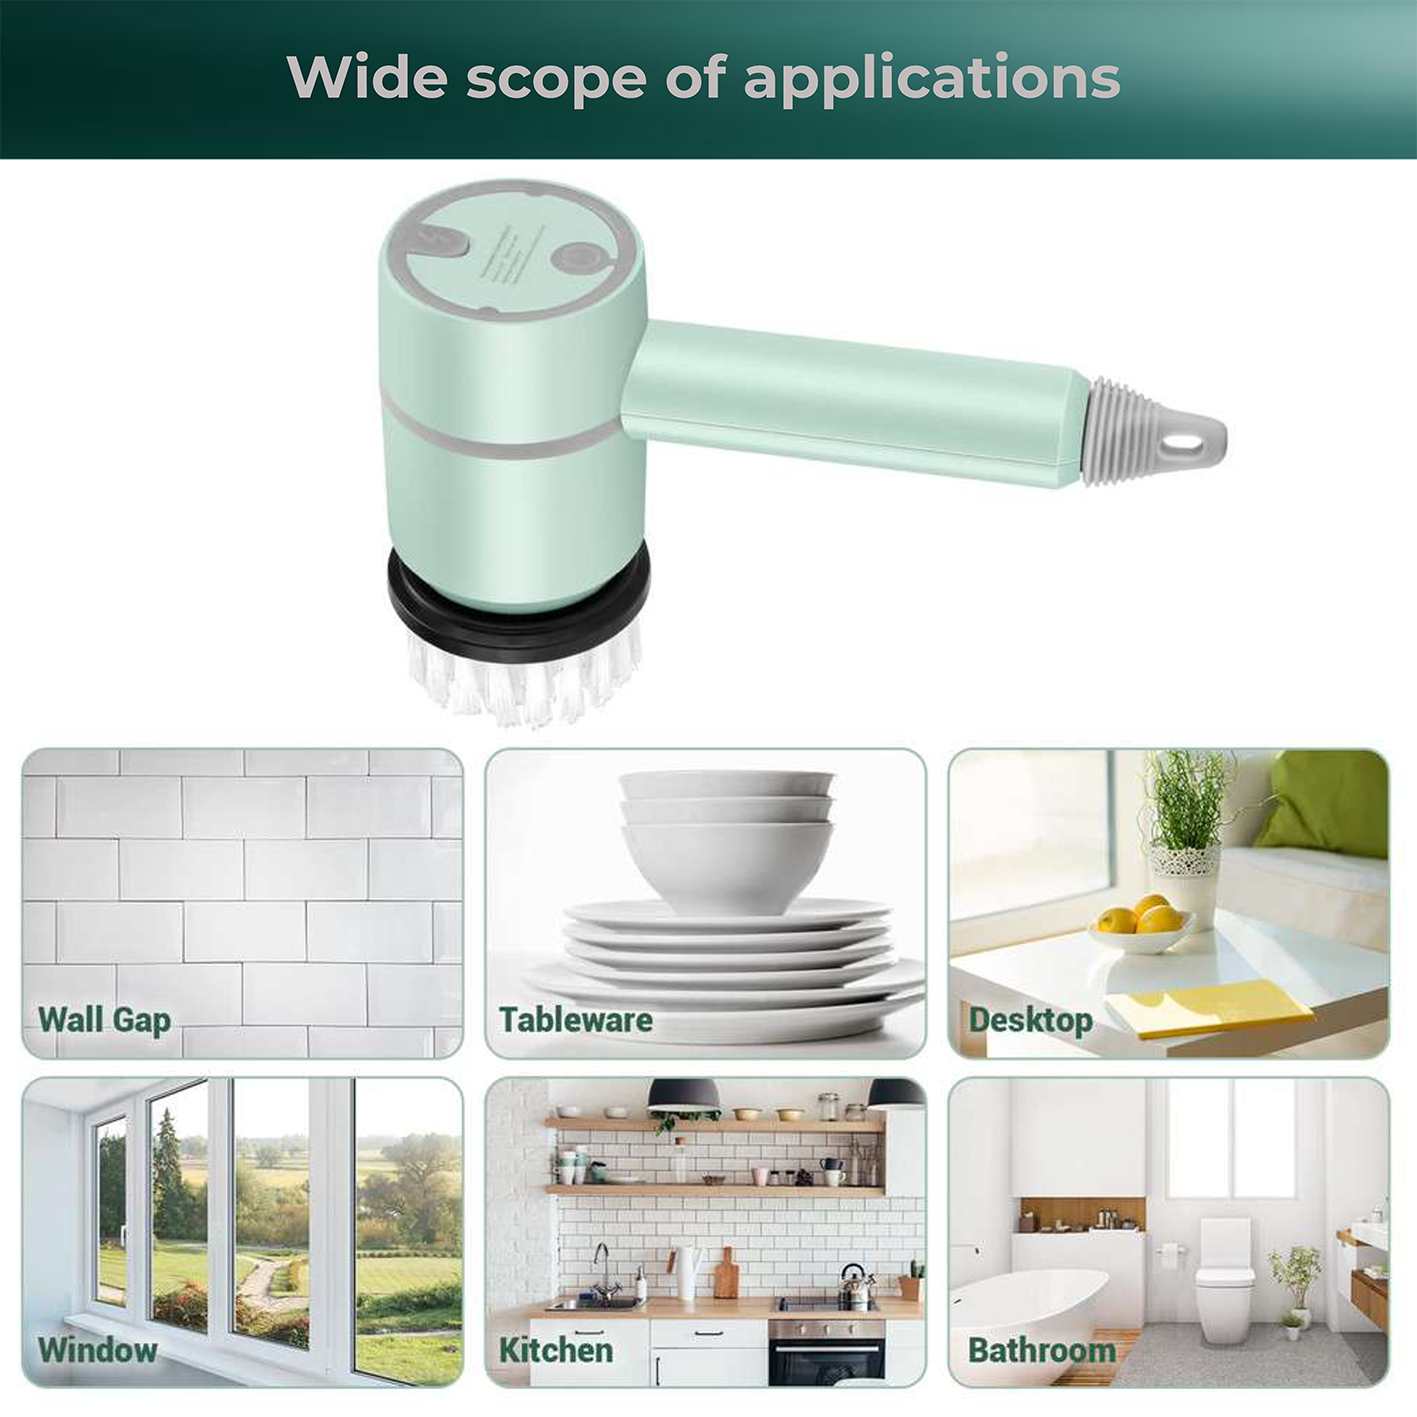 "SpotLess scrubber shown with its range of applications for cleaning wall gaps, tableware, desktops, windows, kitchens, and bathrooms, illustrating versatility"